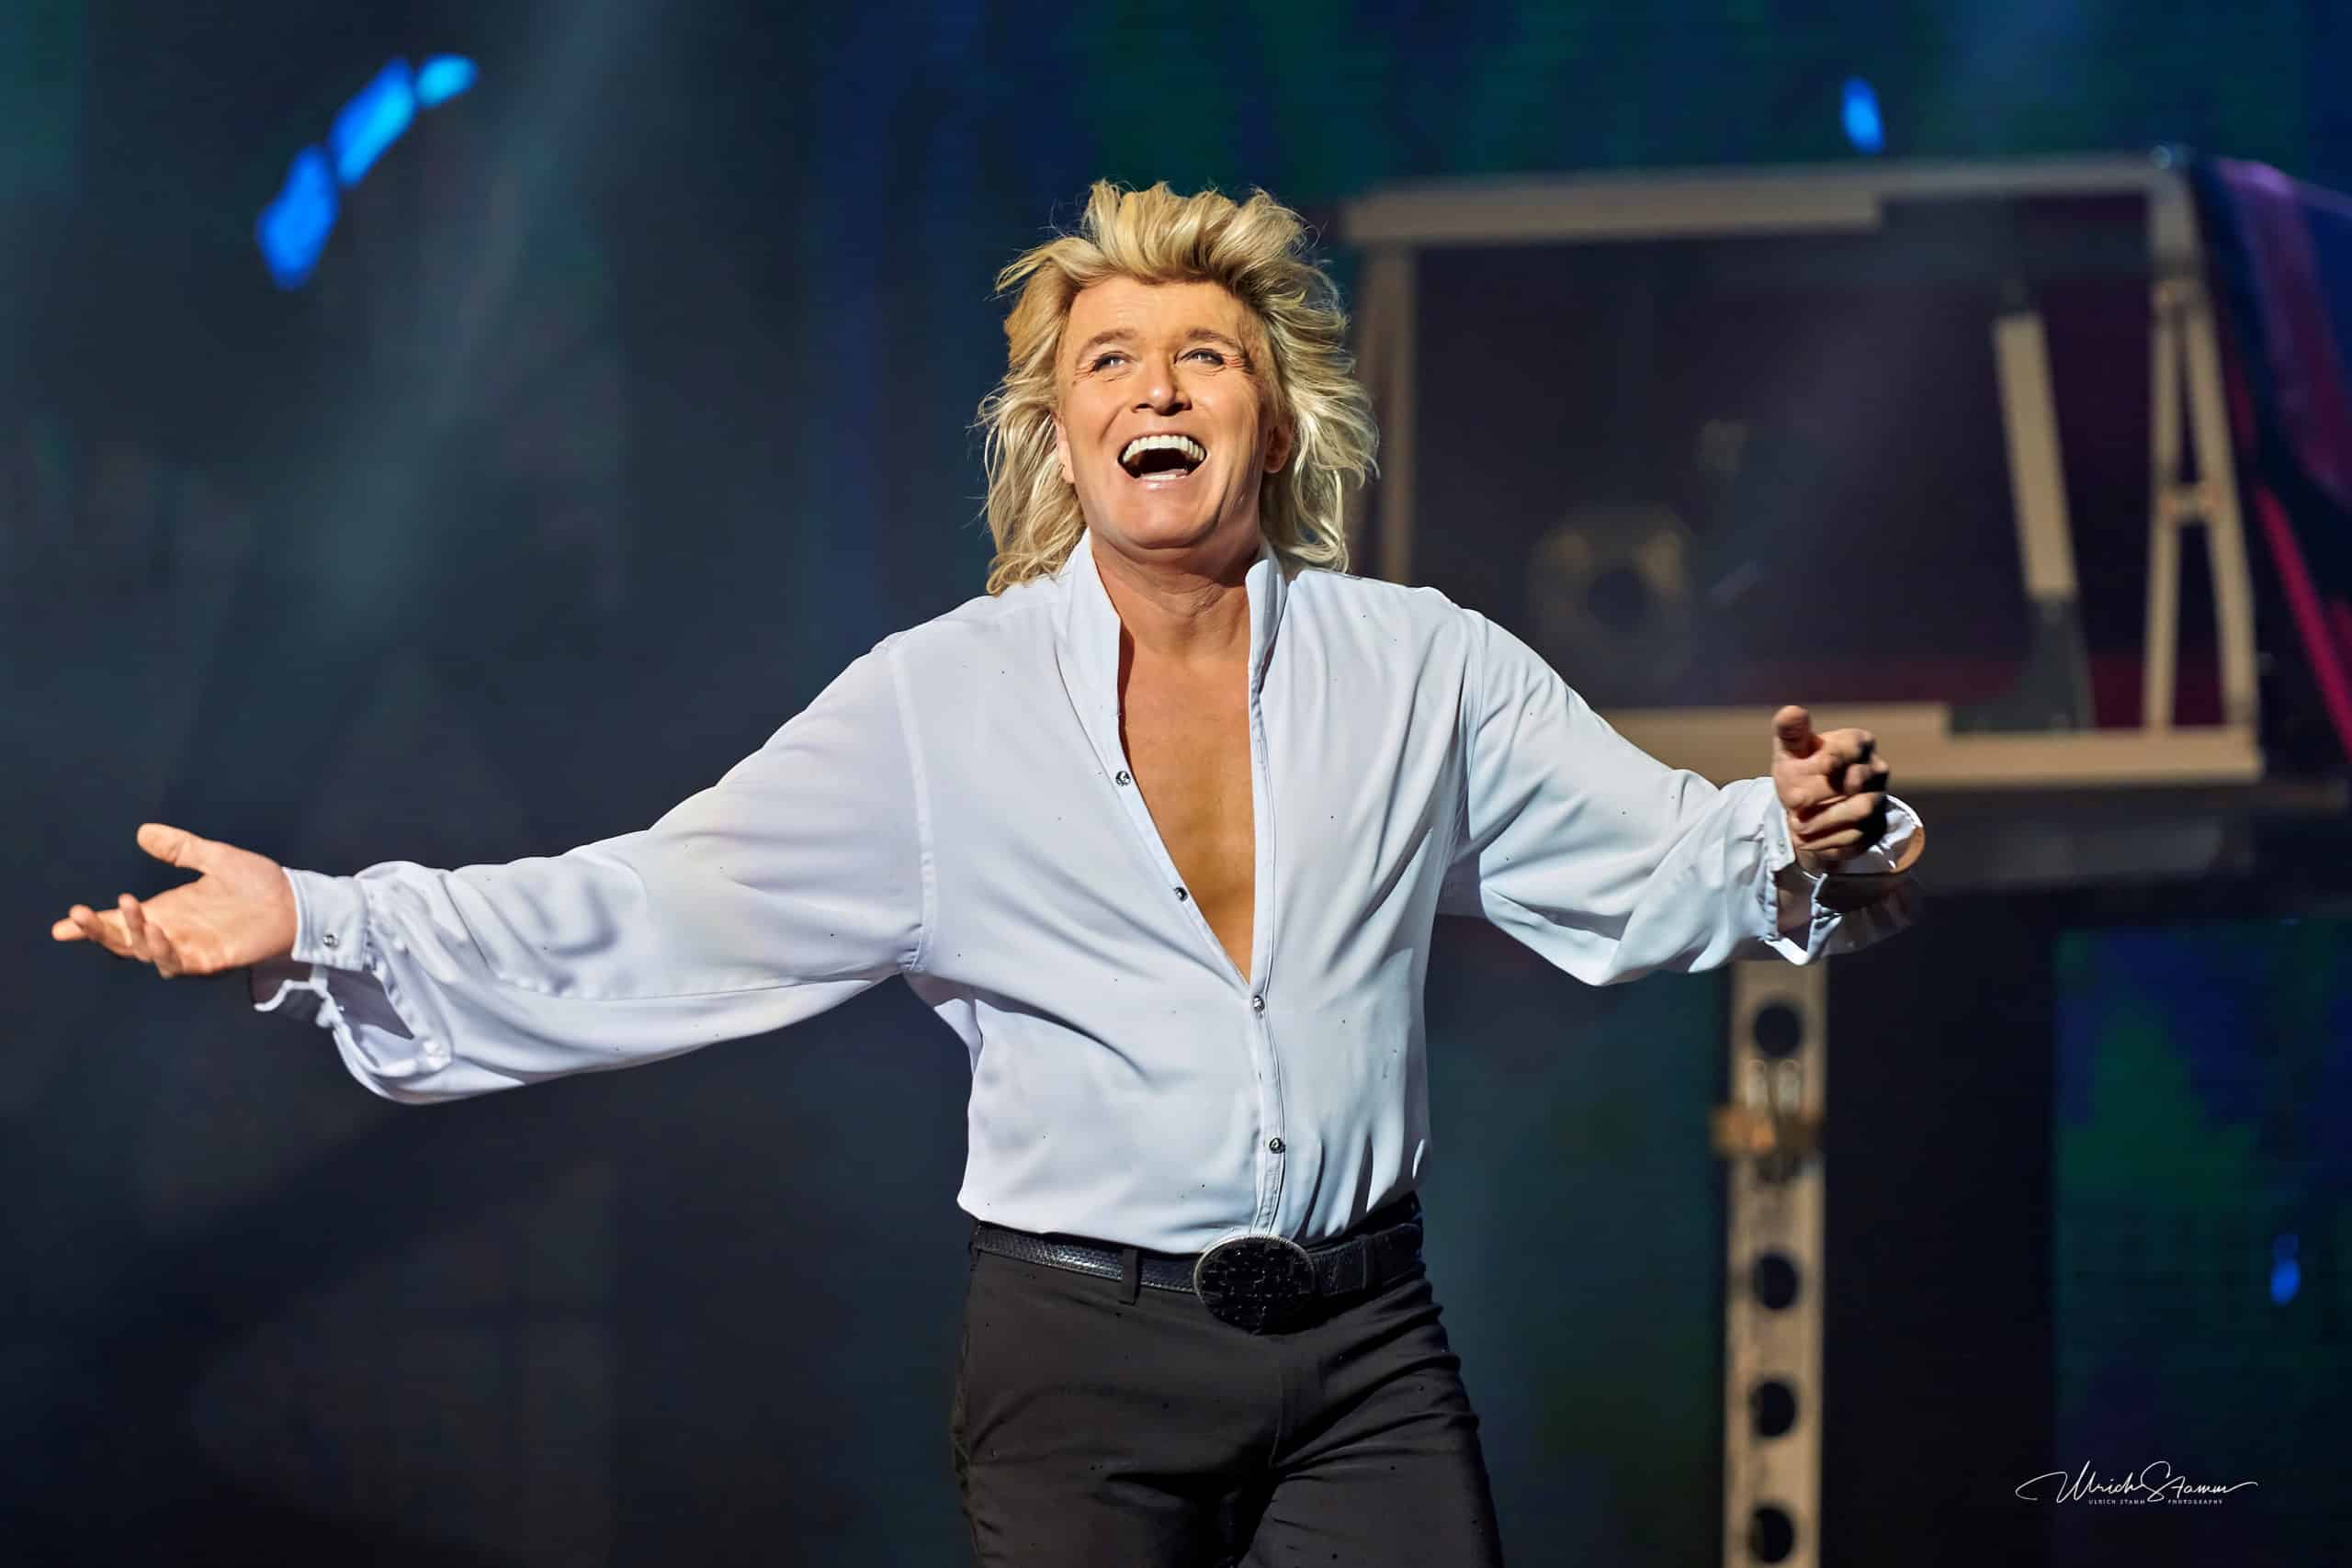 Hans Klok Live from Las Vegas Tour Hannover US 2023 05 29 25 scaled